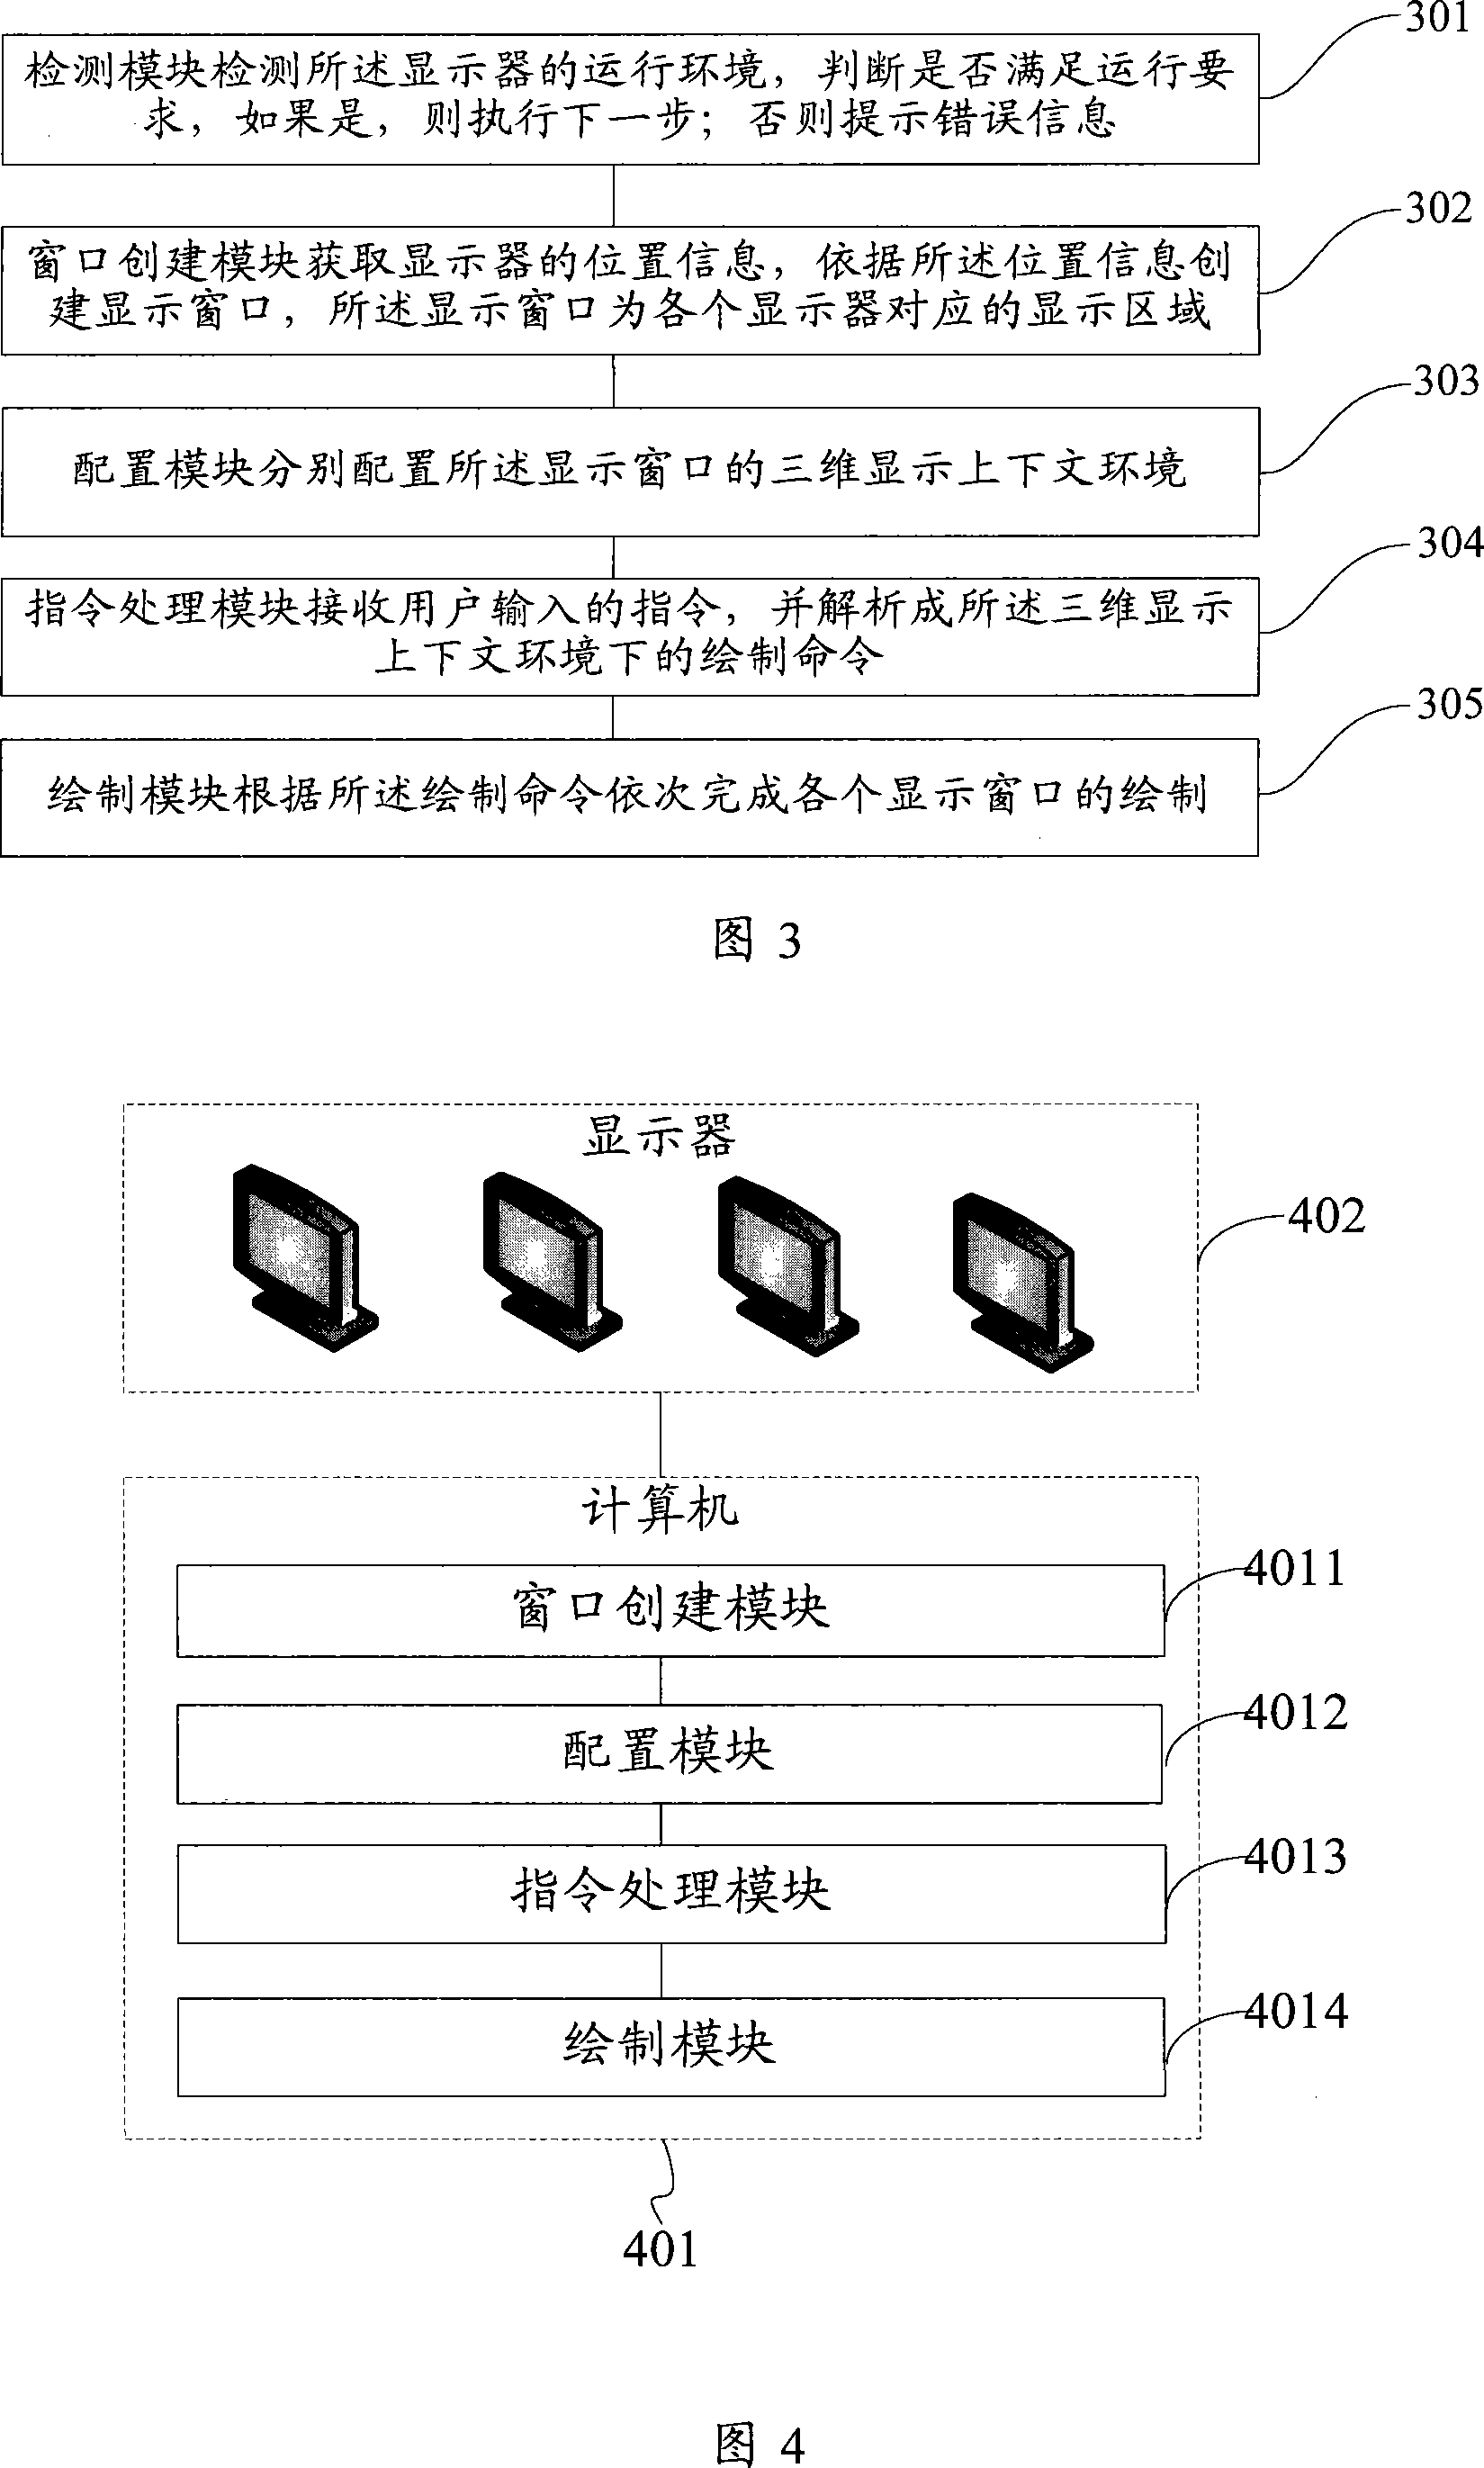 Multi-screen 3-D in-phase display process, device and system